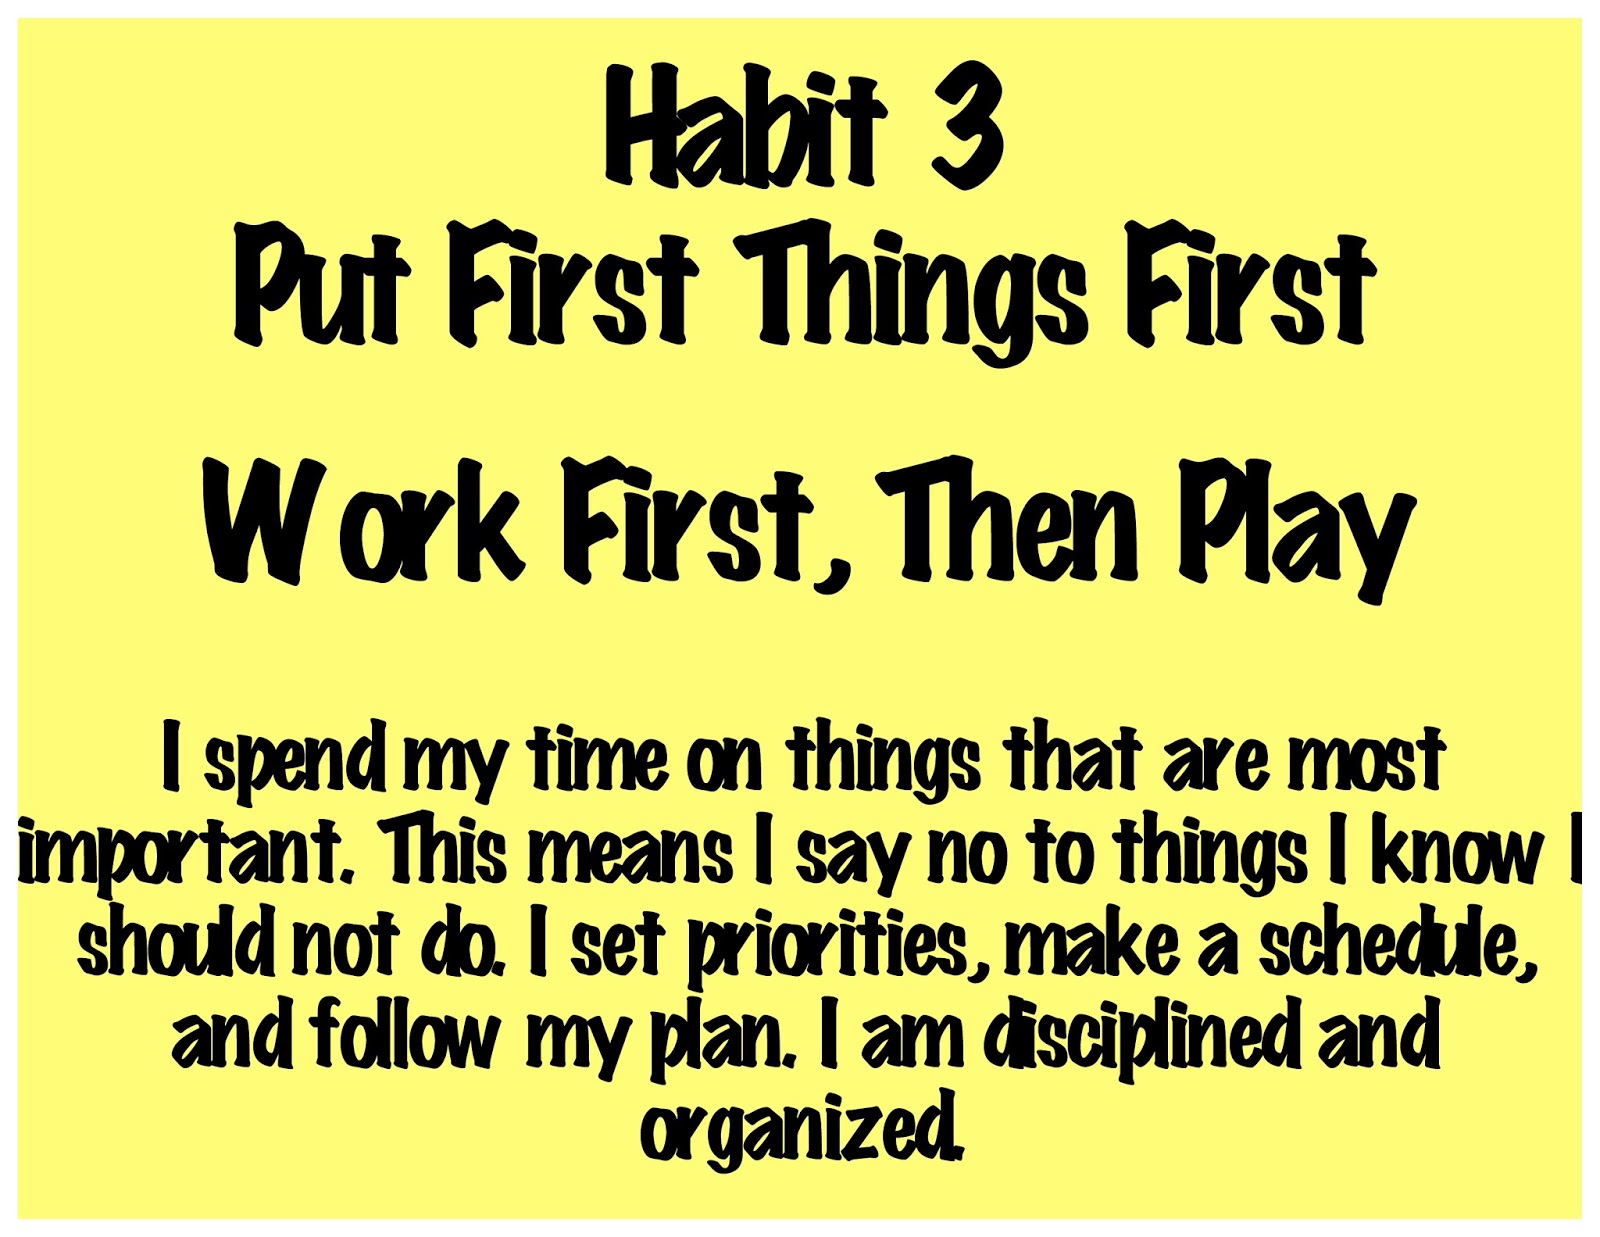 Decker's Dinosaurs 4th Grade WWB: Habit 3: Put First Things First